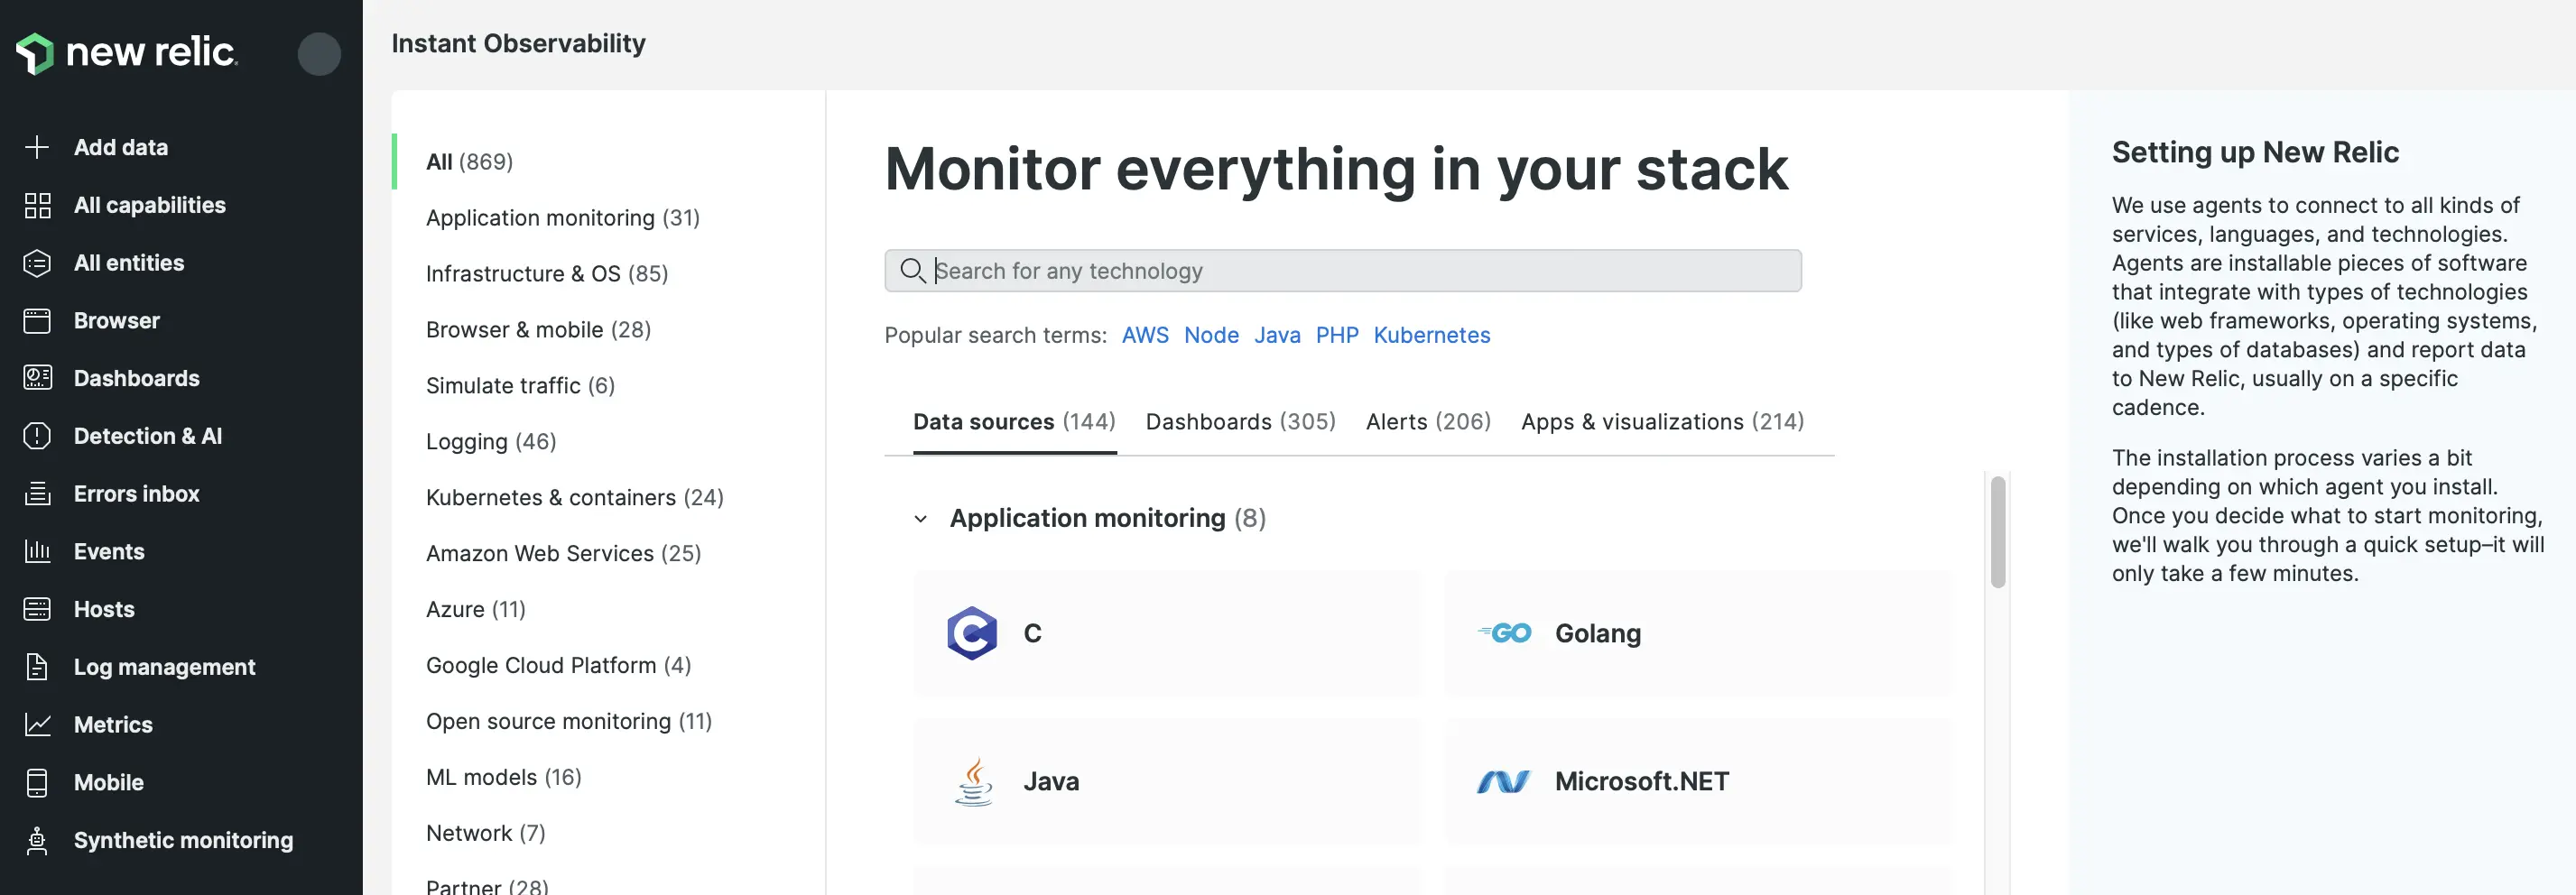 A screenshot of the new monitor everything page UI.